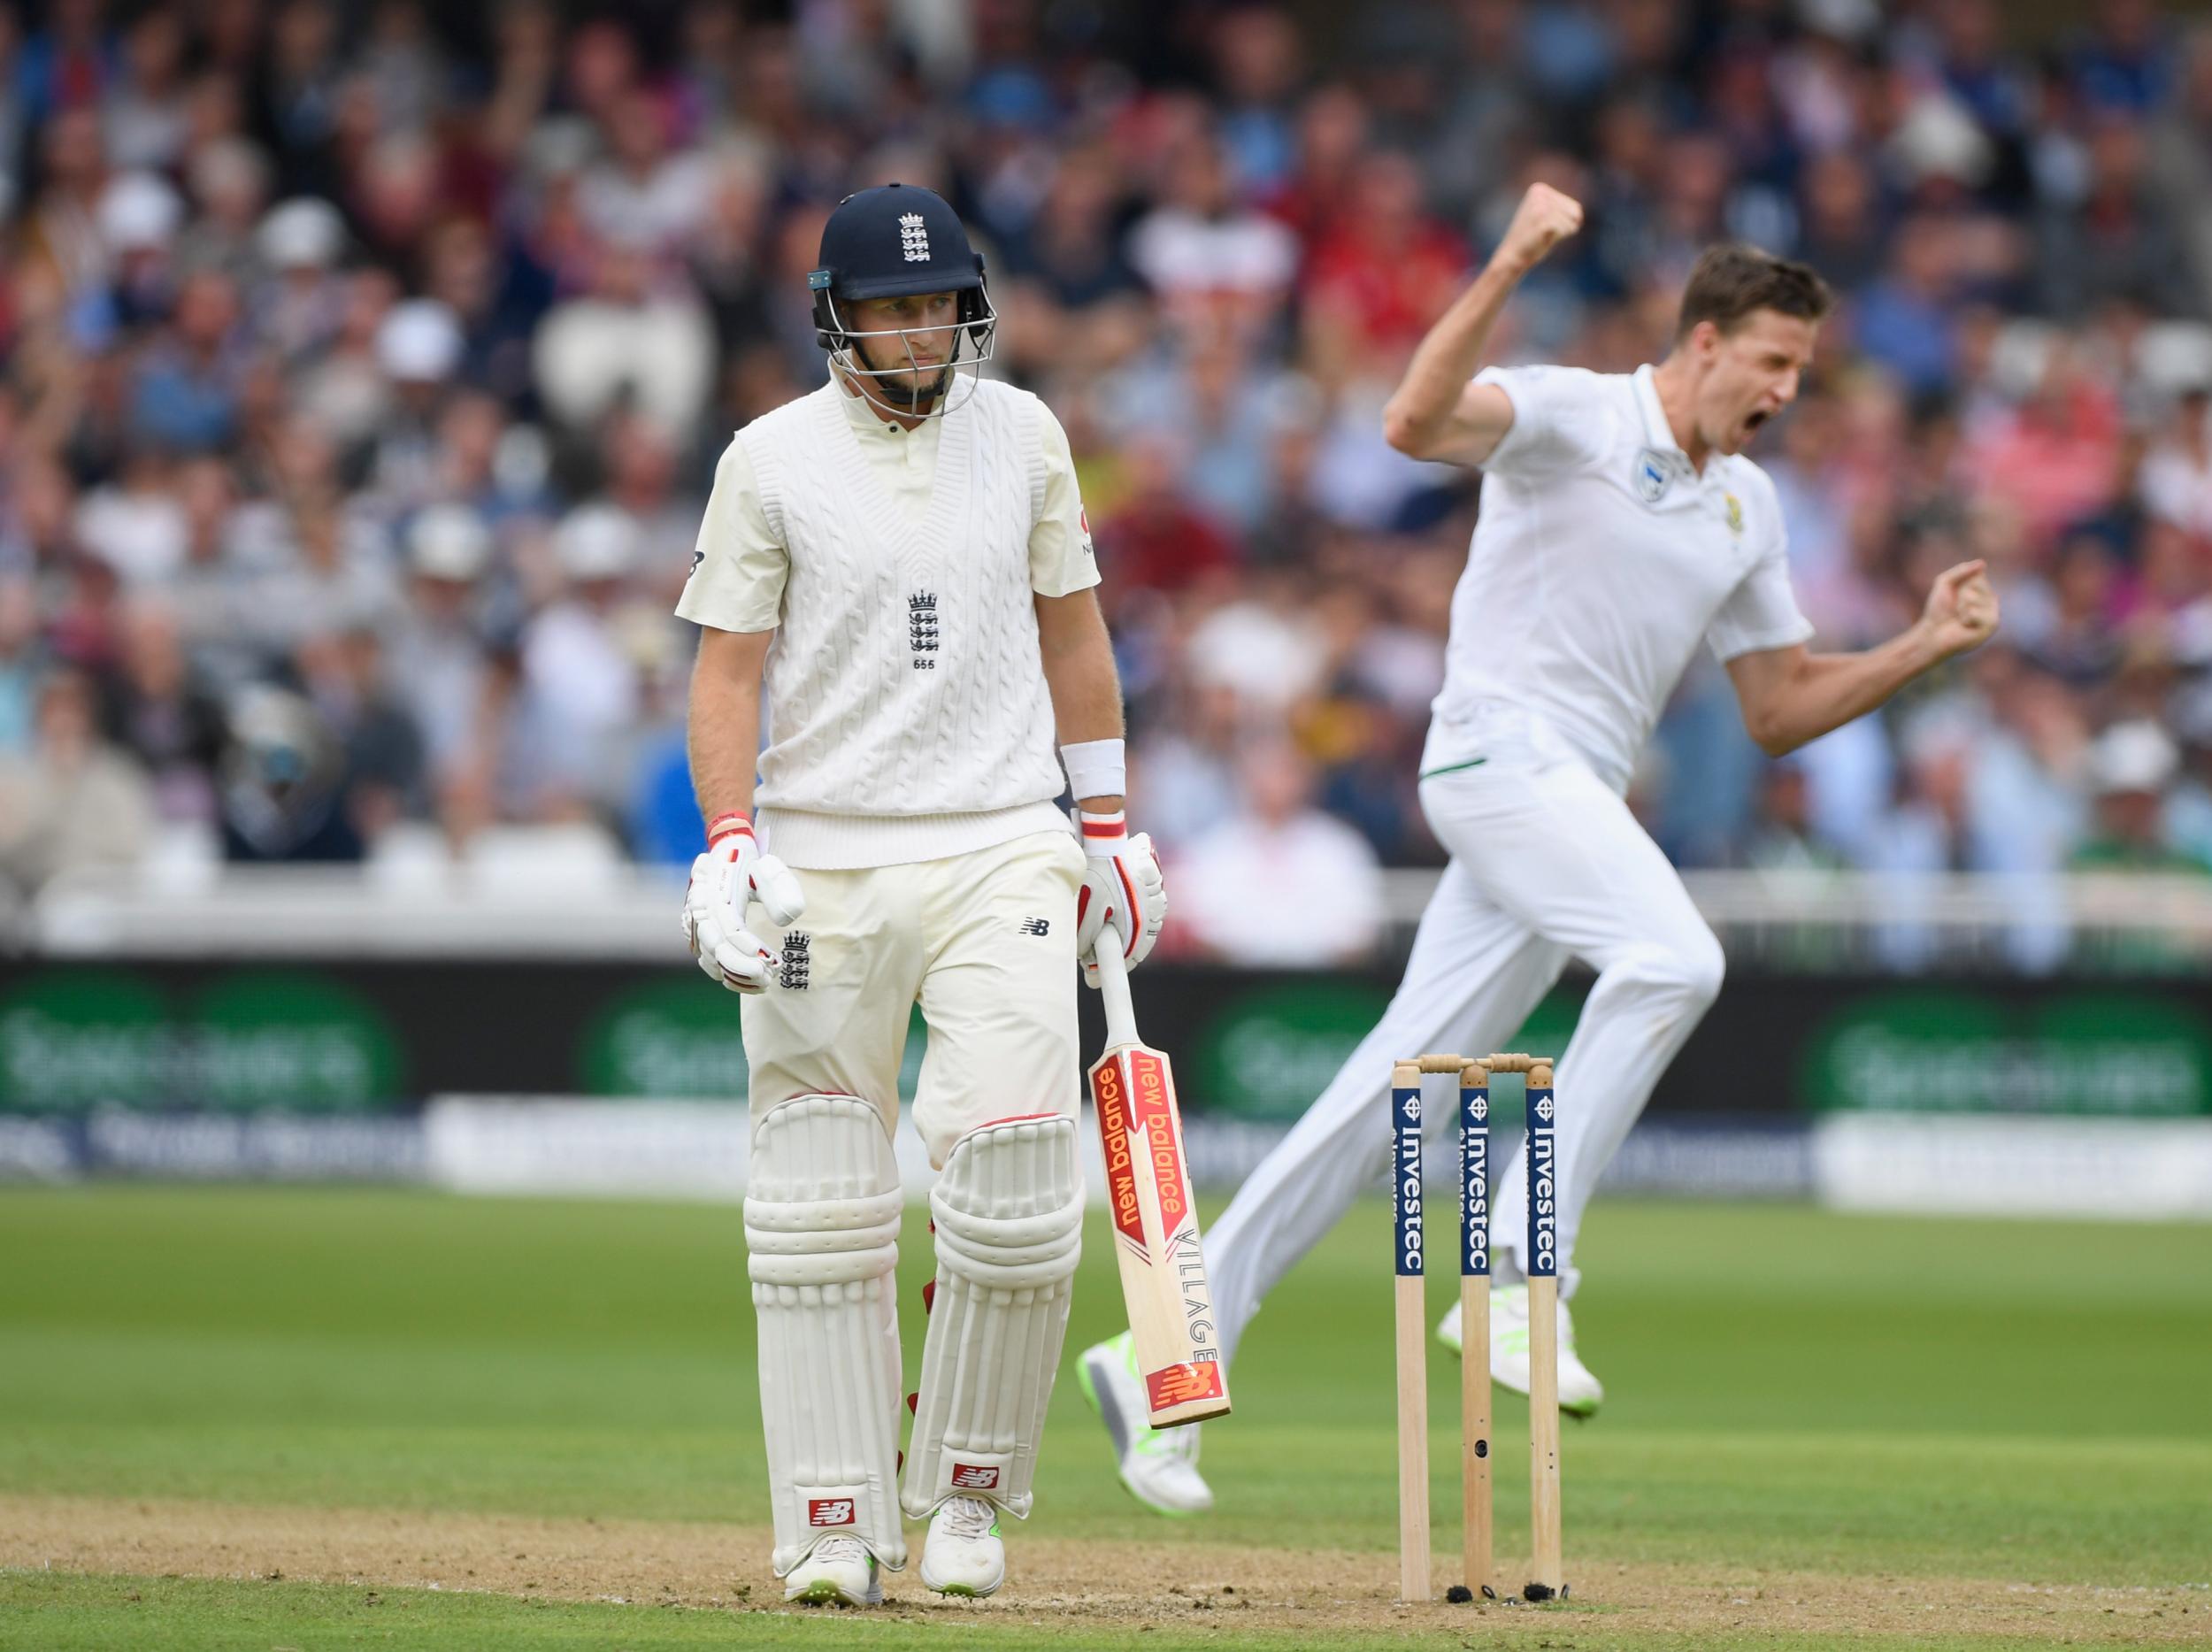 Root was unable to single-handedly save England this time